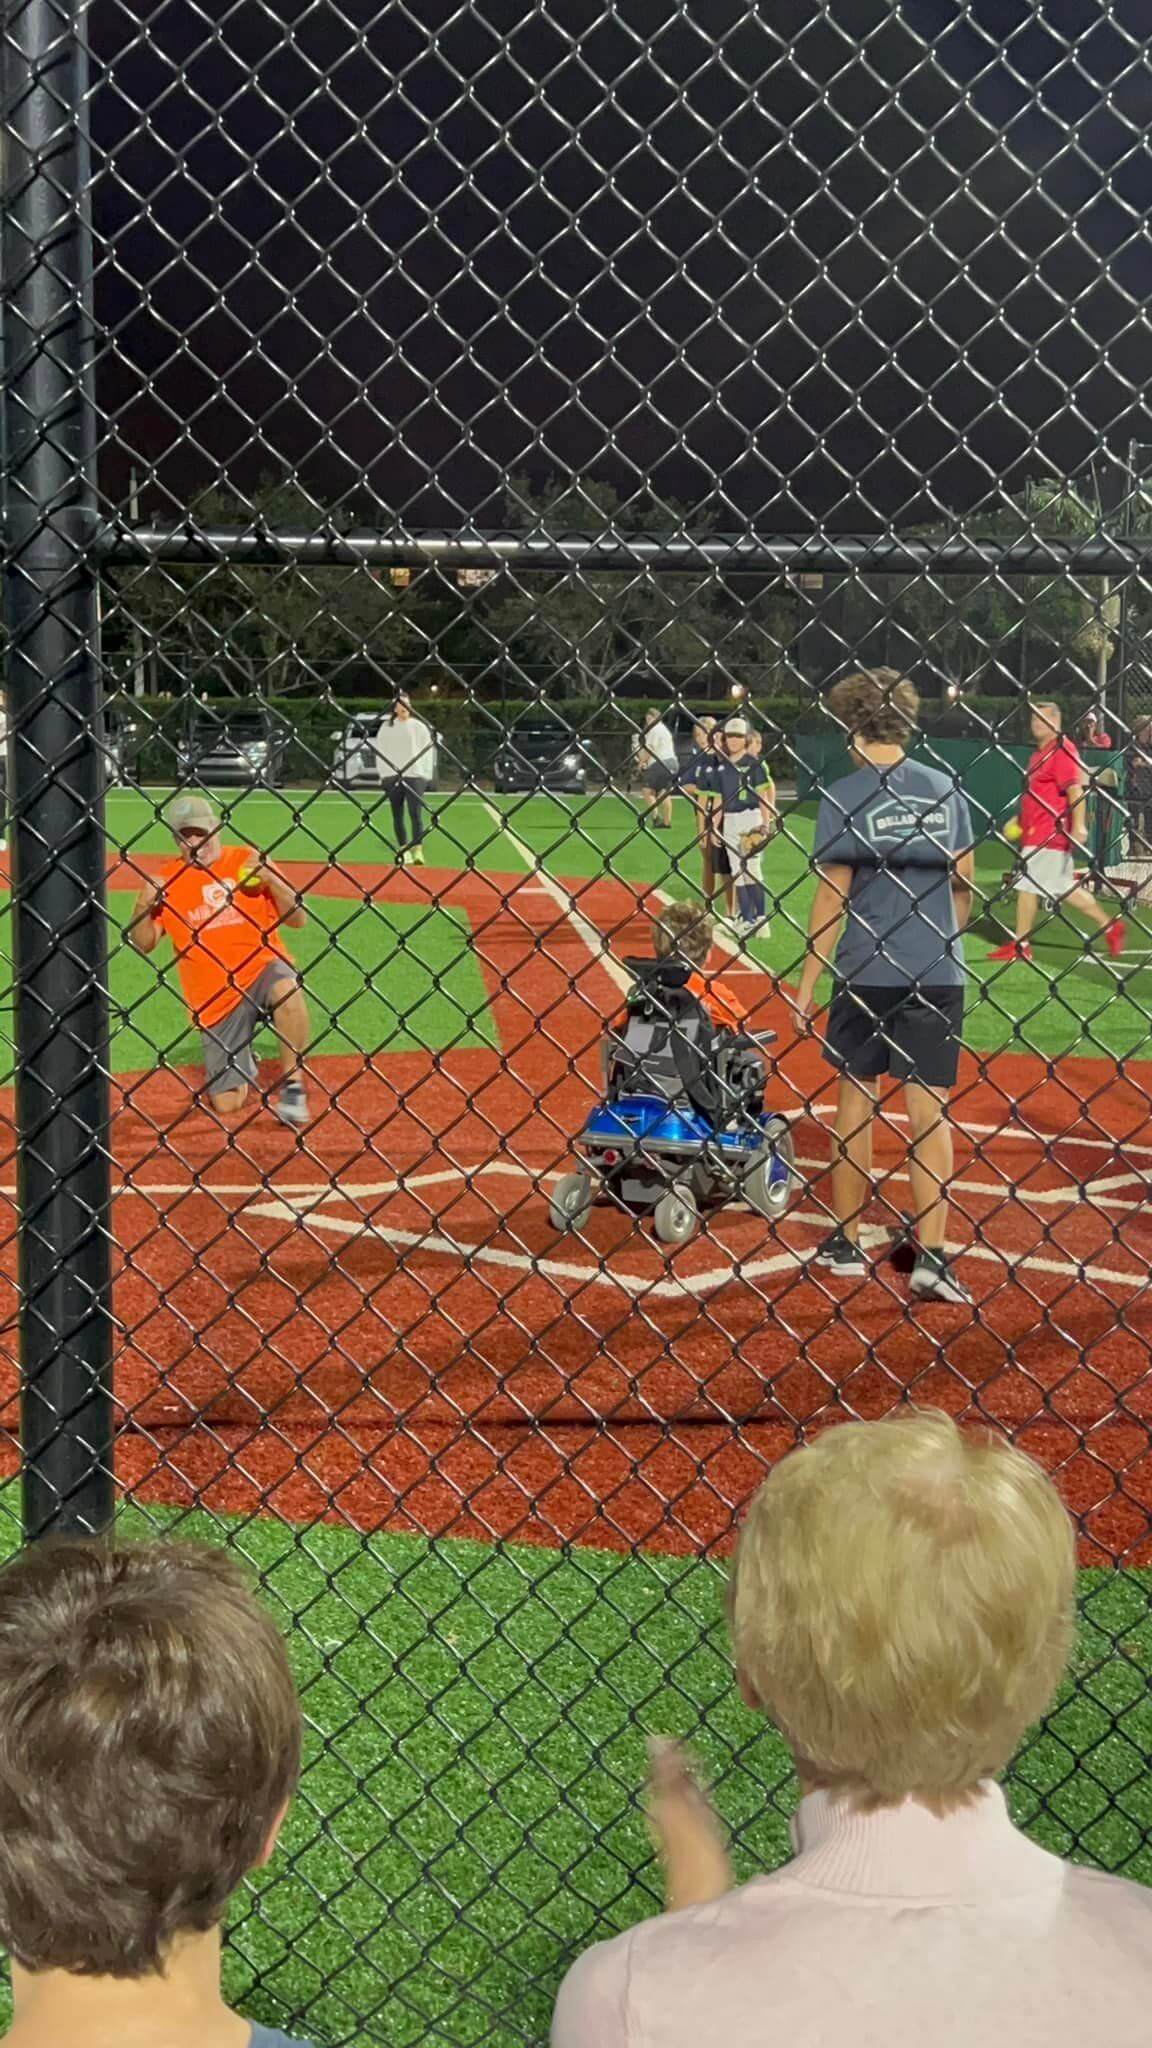 The Miracle League of Palm Beach County Ball Game